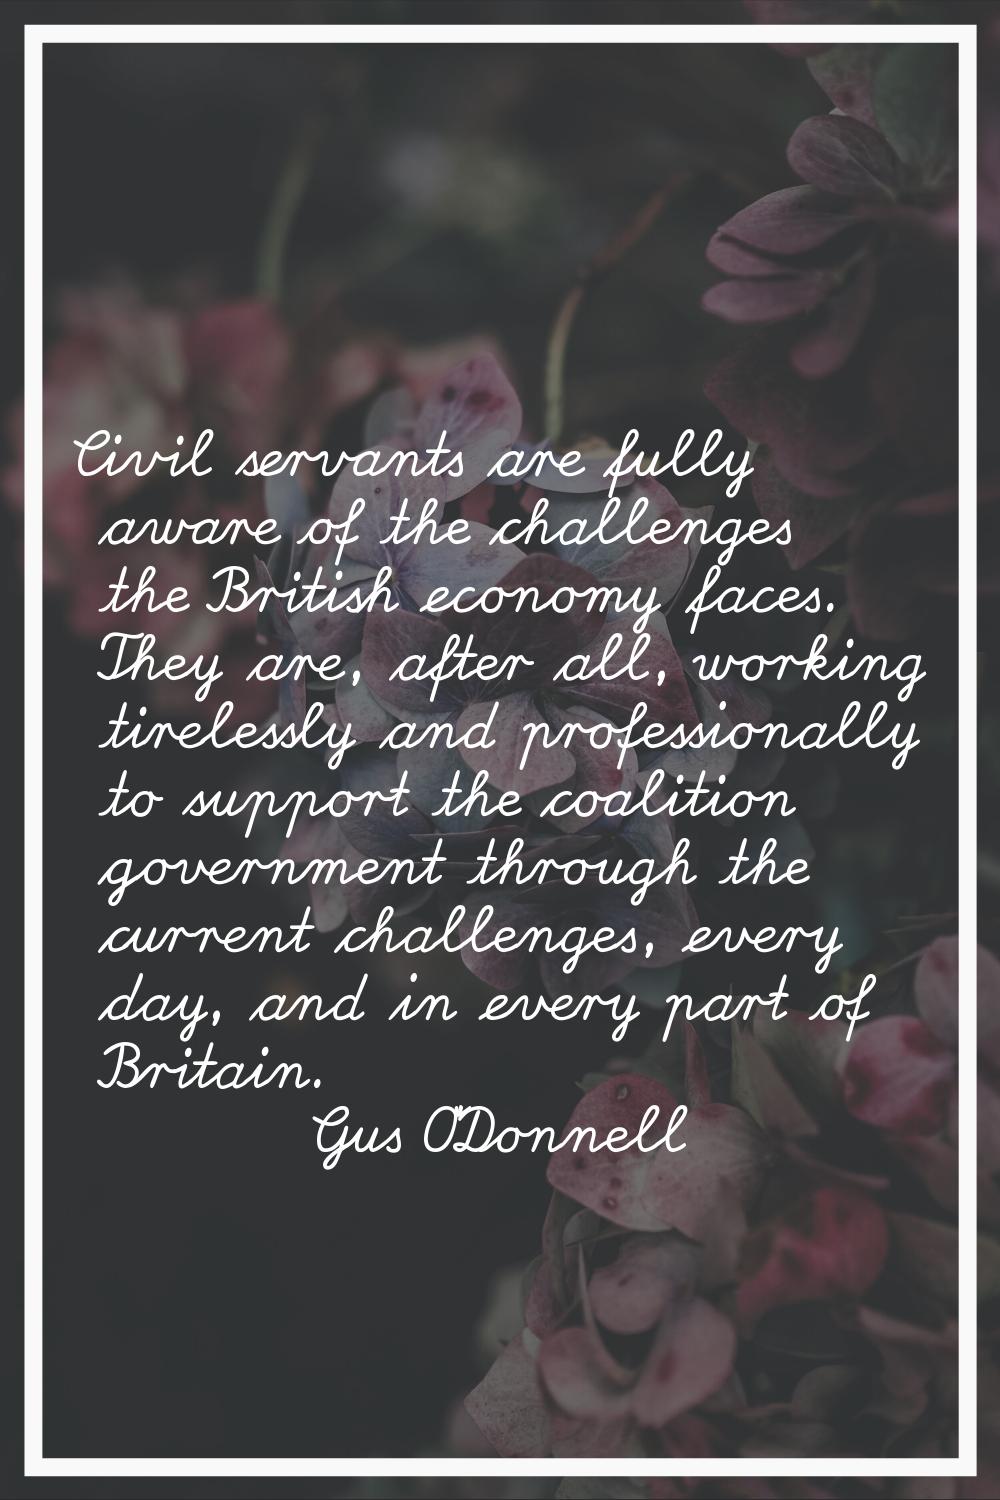 Civil servants are fully aware of the challenges the British economy faces. They are, after all, wo